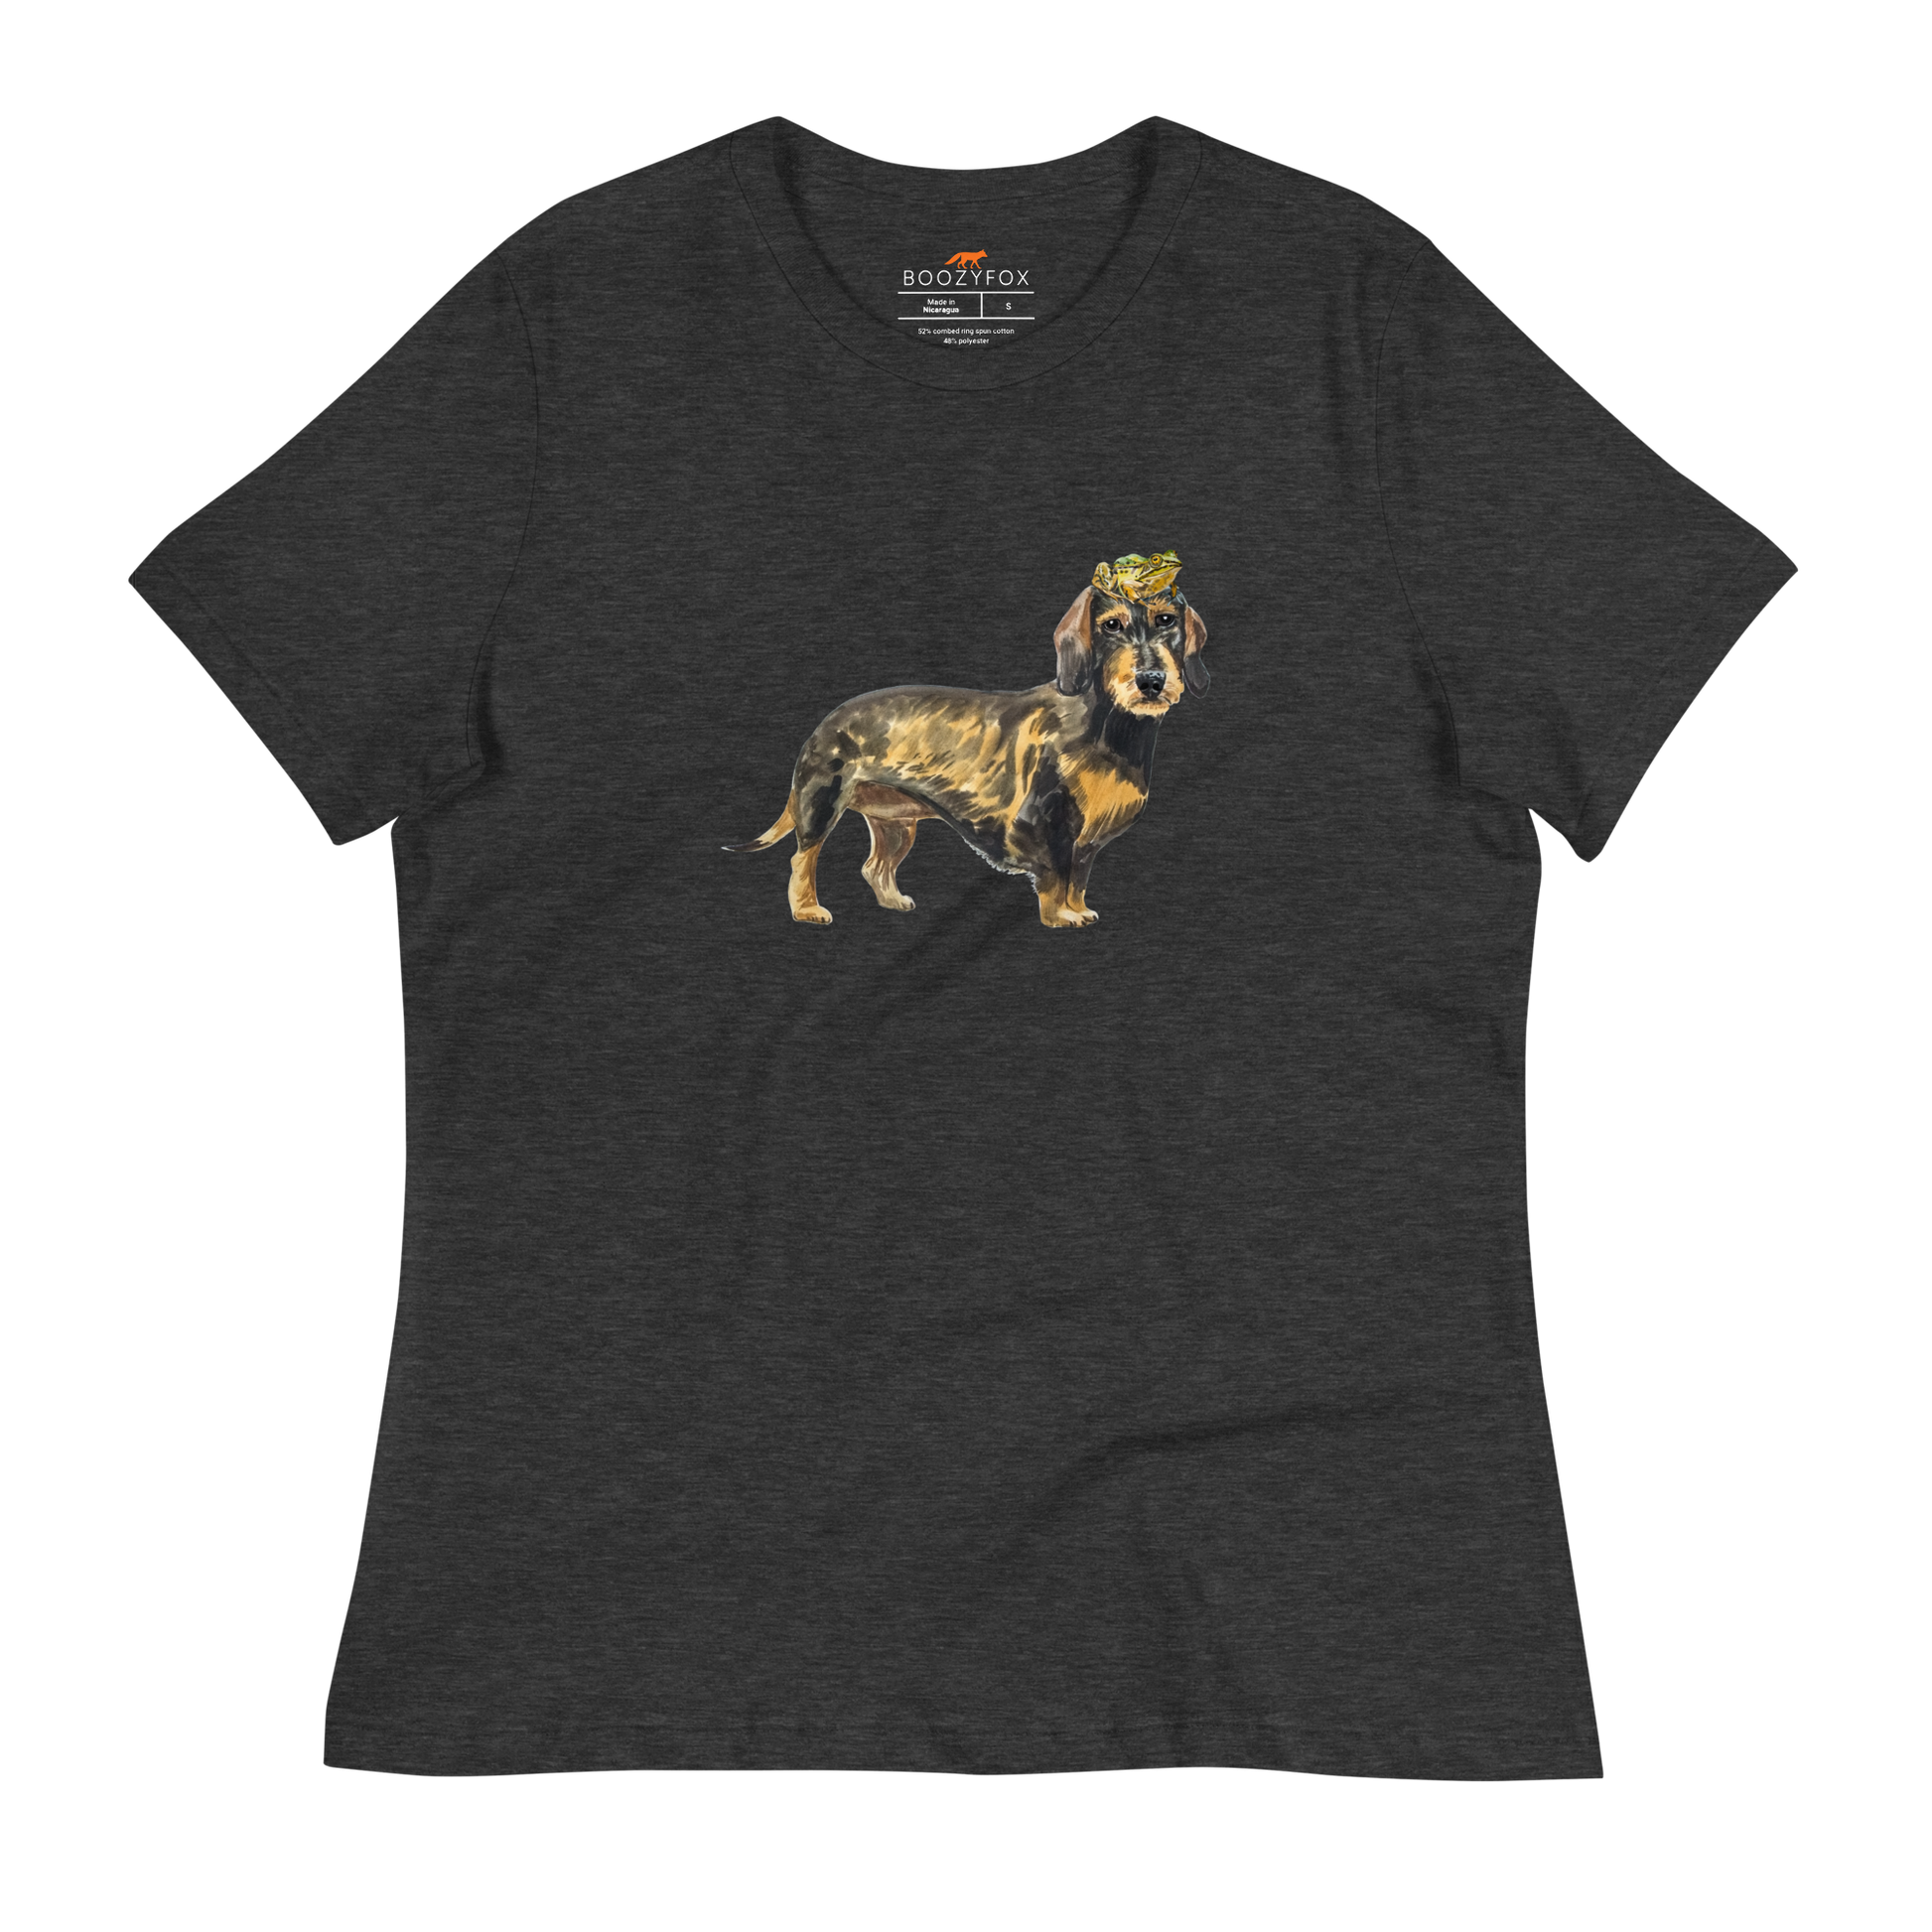 Women's relaxed dark grey heather Dachshund t-shirt featuring a charming Frog on a Dachshund's Head graphic on the chest - Women's Cute Graphic Dachshund Tees - Boozy Fox